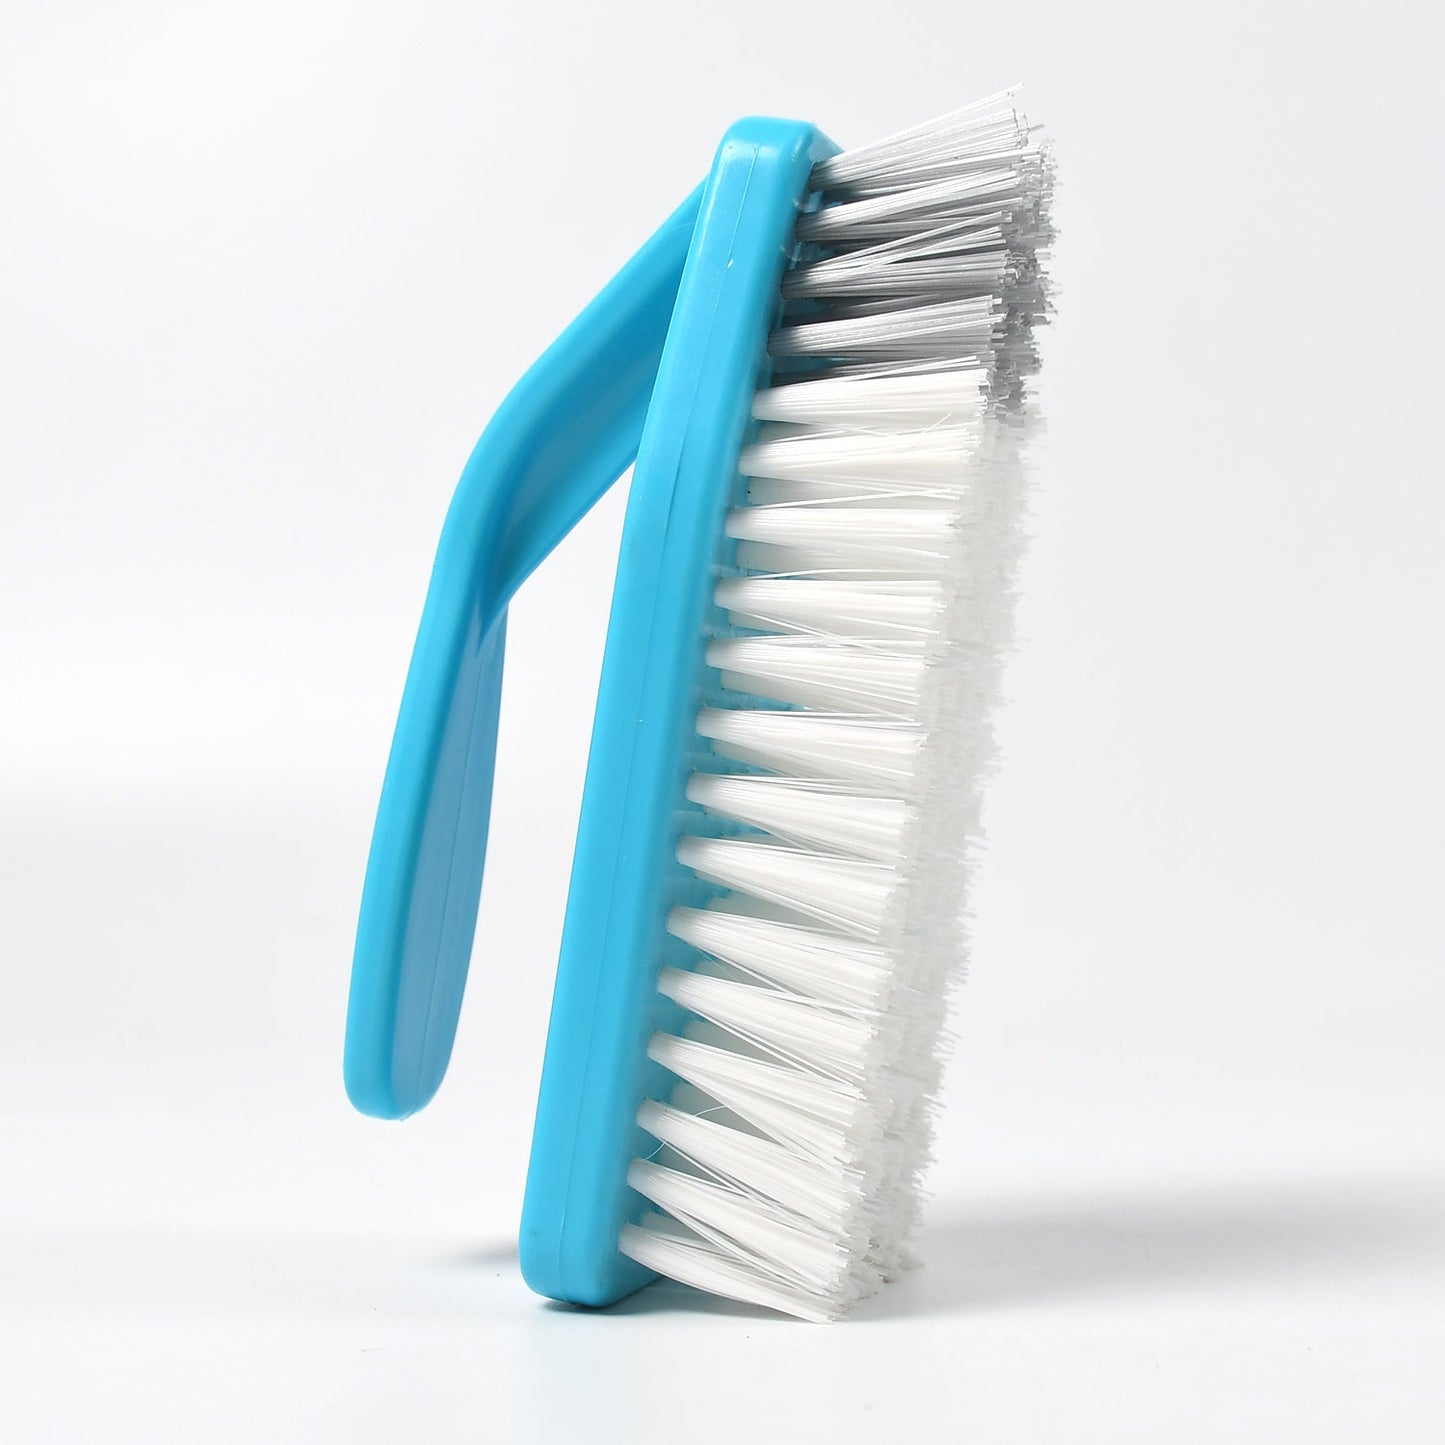 7527 MULTIPURPOSE DURABLE CLEANING BRUSH WITH HANDLE FOR CLOTHES LAUNDRY FLOOR TILES AT HOME KITCHEN SINK, WET AND DRY WASH CLOTH SPOTTING WASHING SCRUBBING BRUSH. 